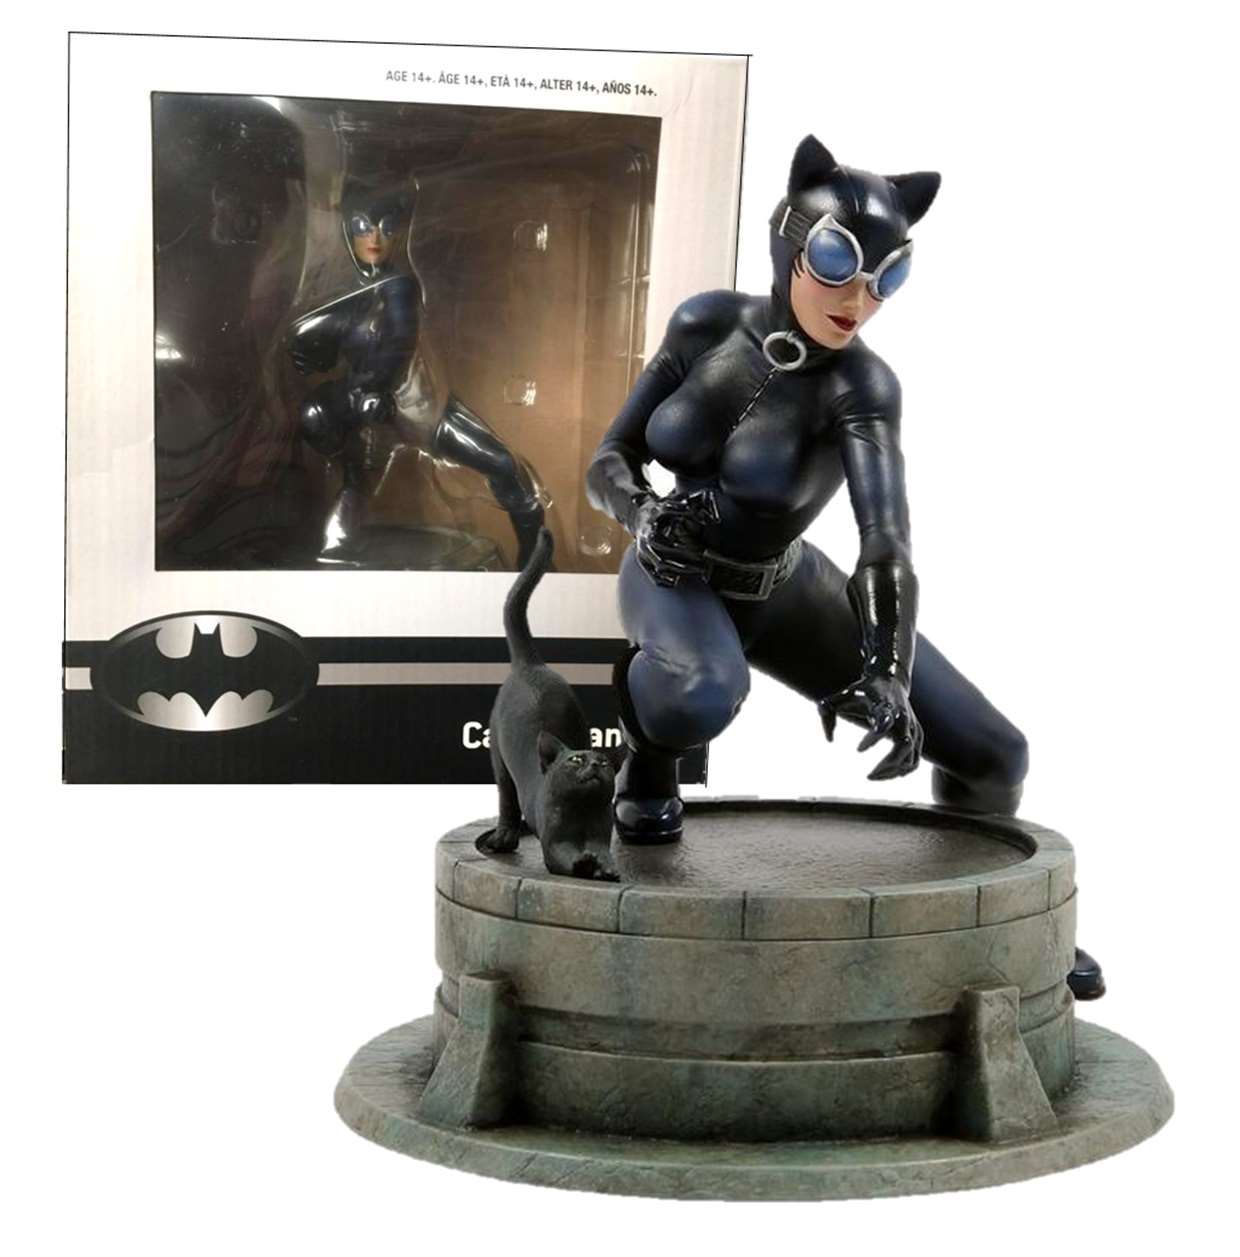 Catwoman Diorama Exclusivo Game Stop + Catwoman Hot Wheels